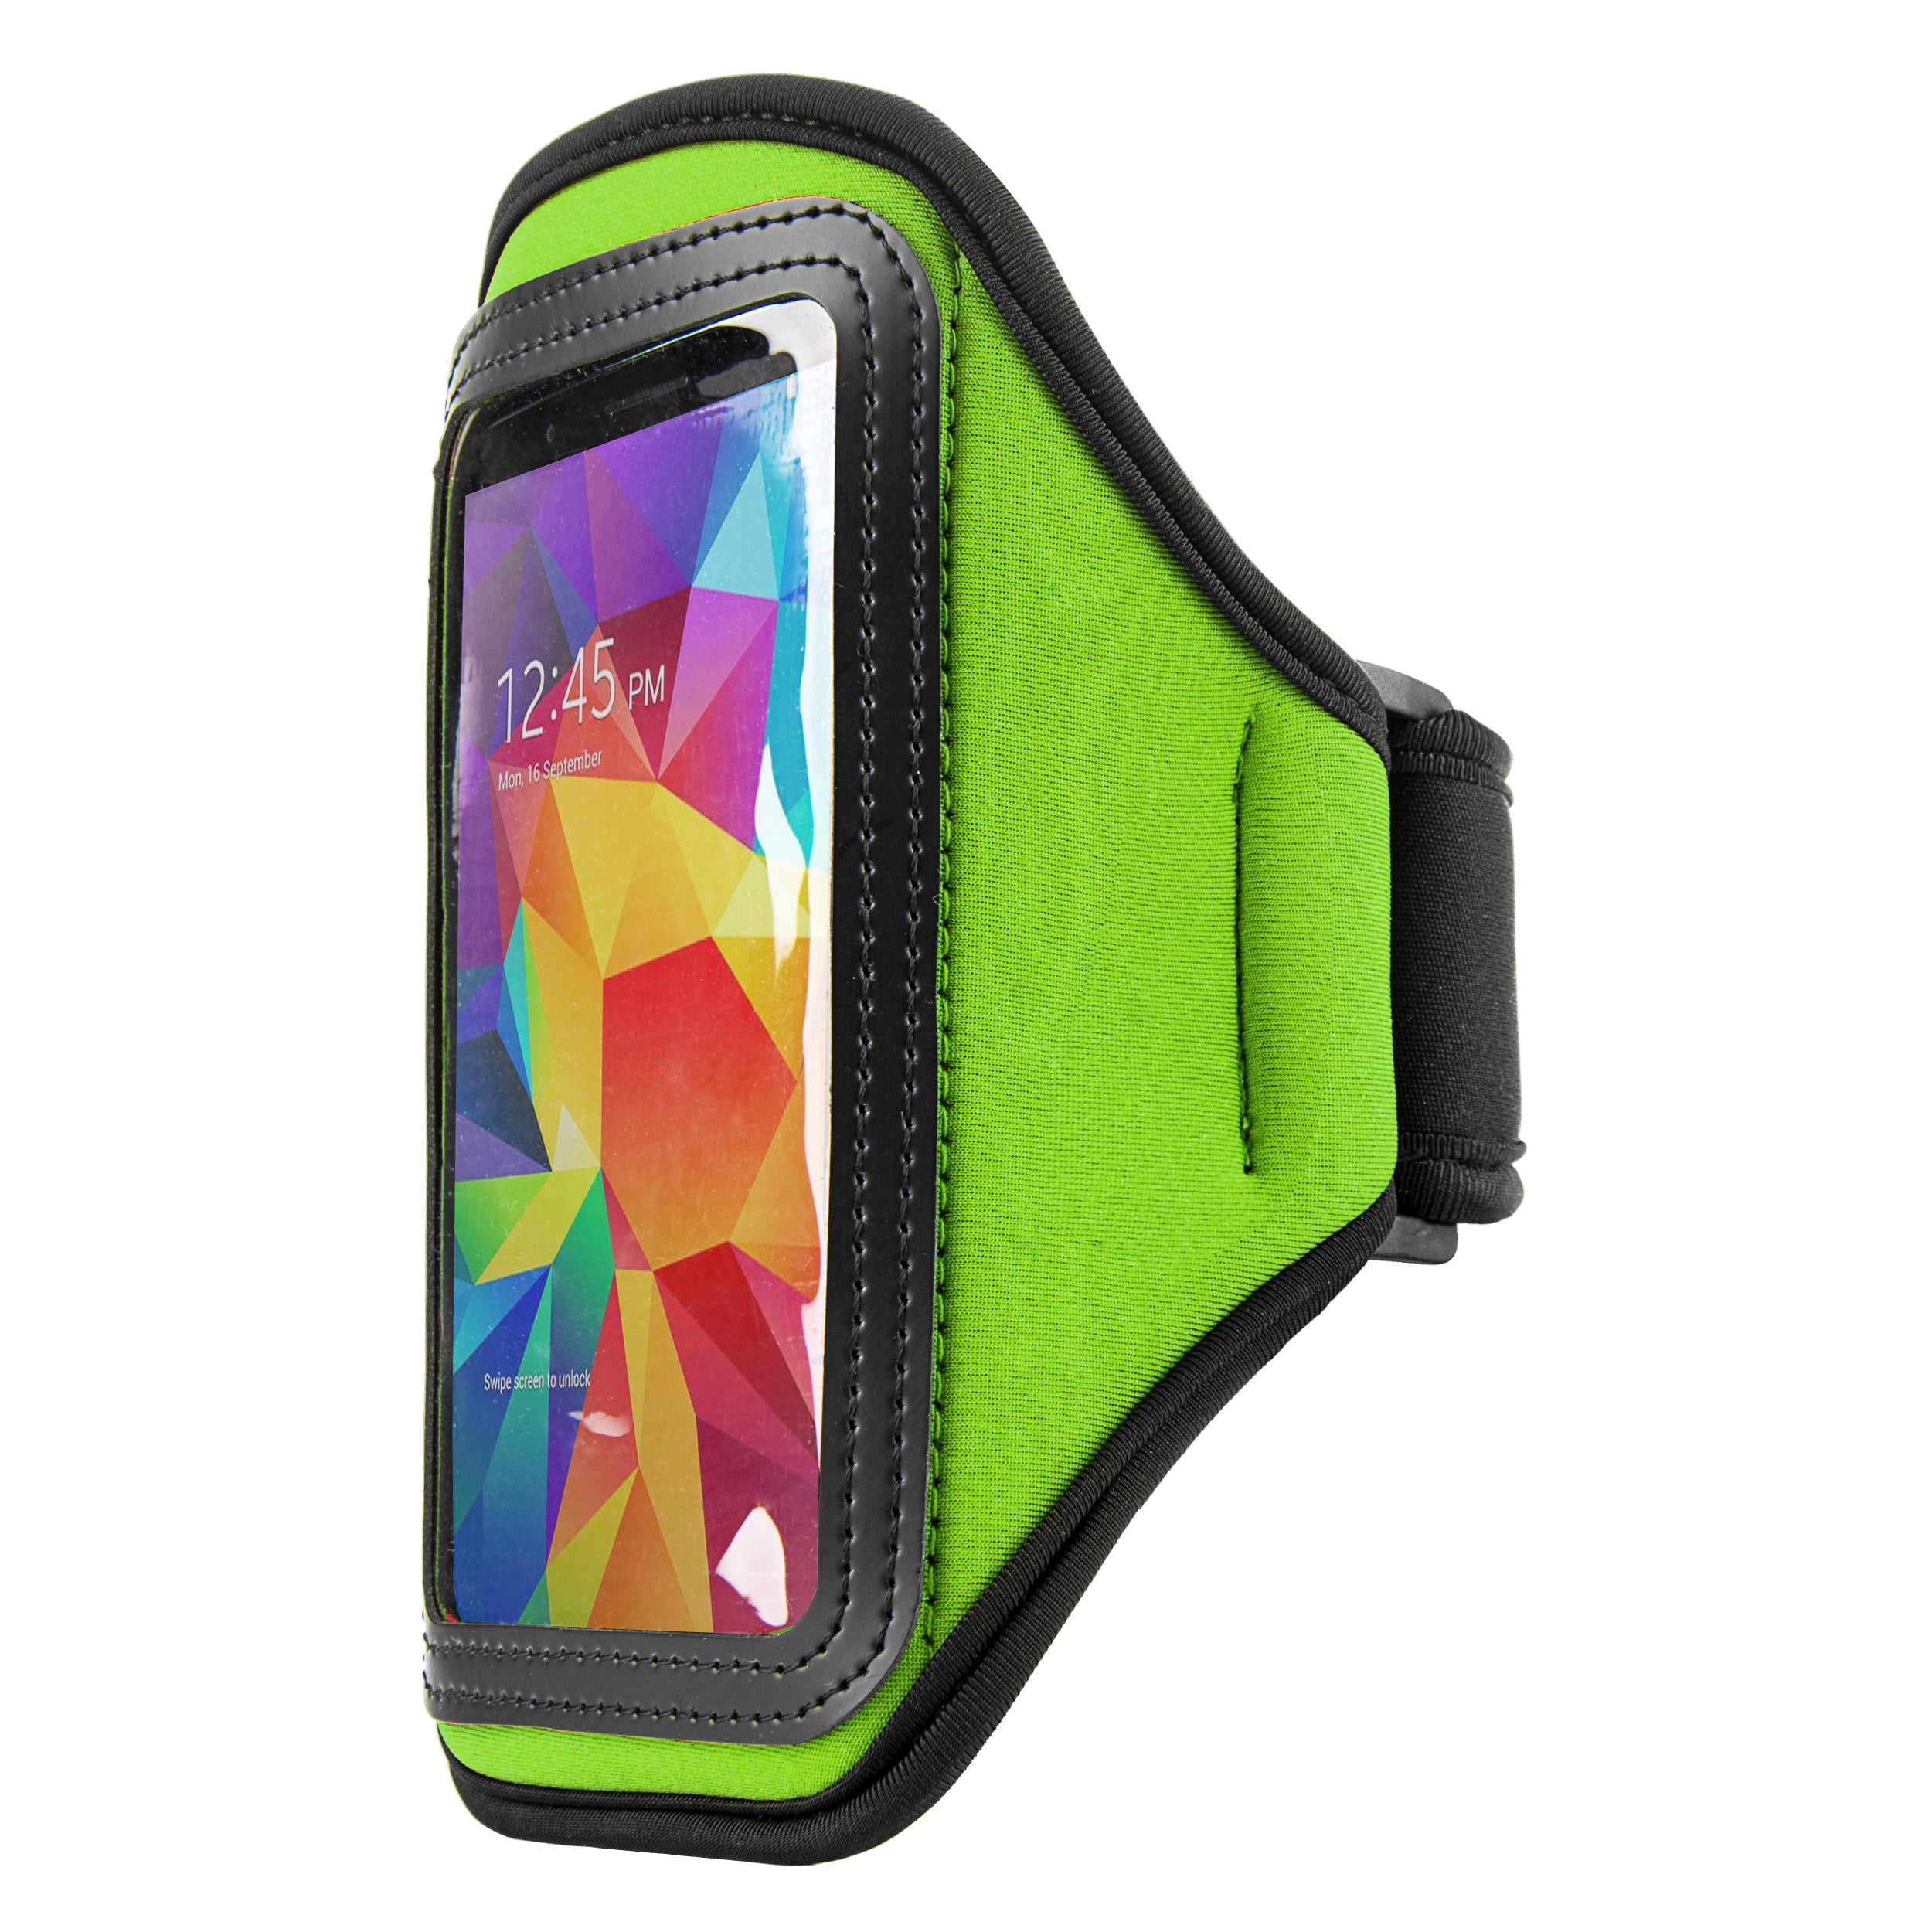 Details about   Quality Fitness Running Sports Workout Armband Phone Case-XIAOMI REDMI NOTE 8 show original title 